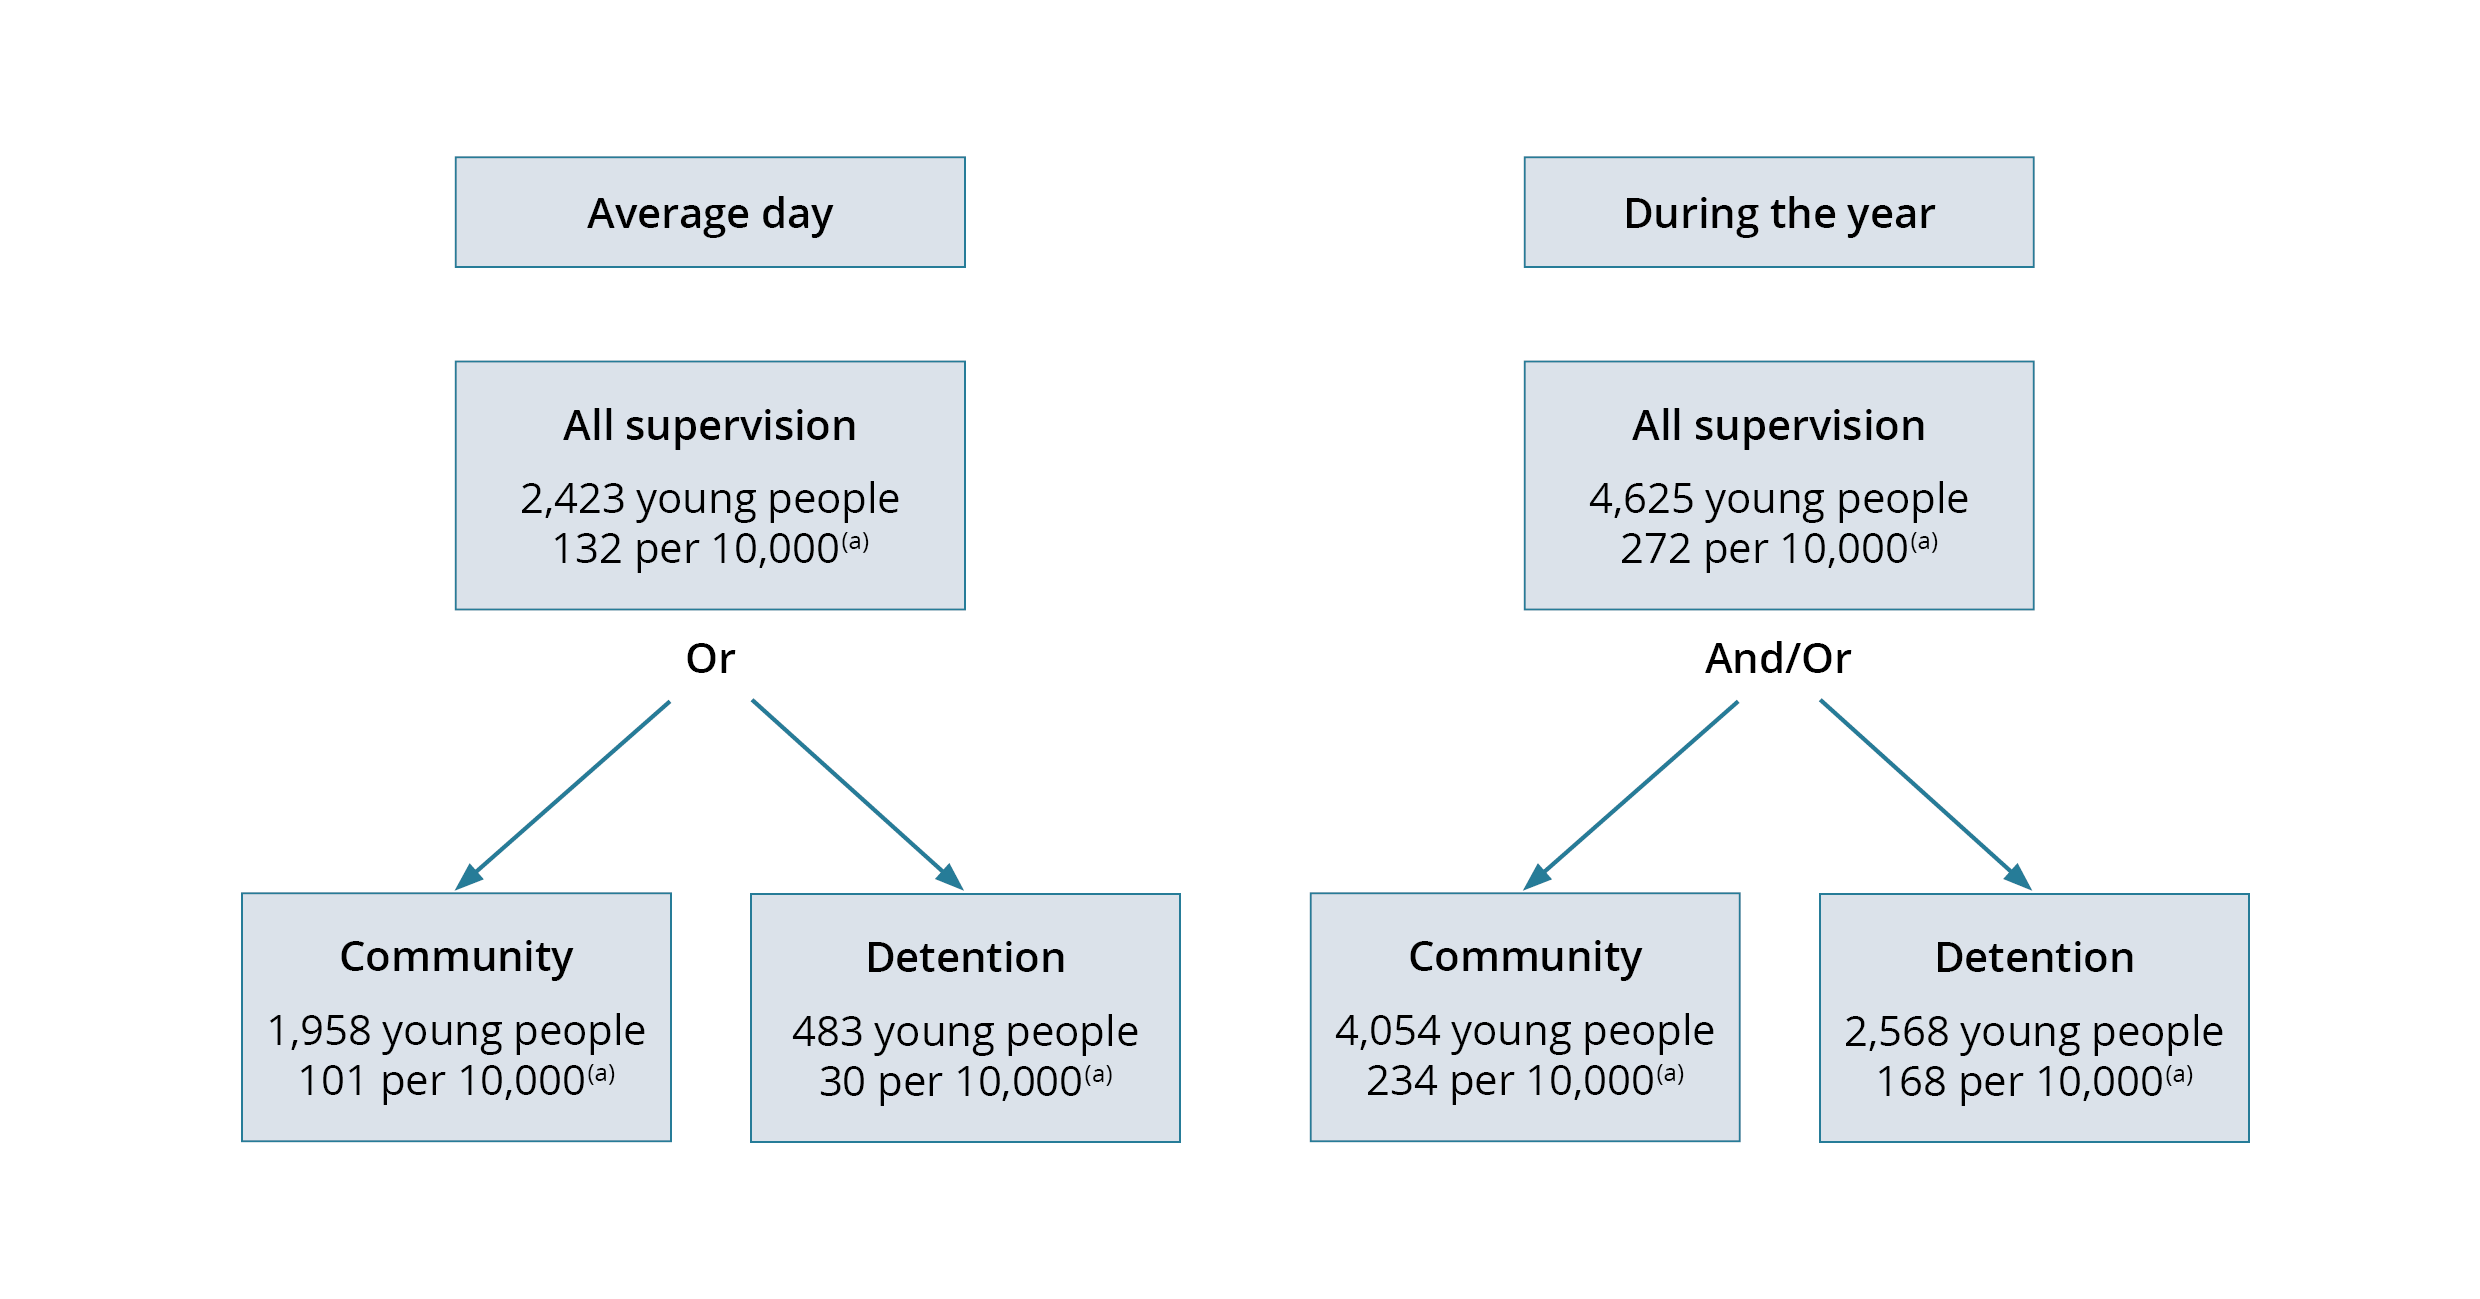 This figure shows two flowcharts with the number and rate of First Nations young people under all types of youth justice supervision on an average day and during the year. There were 2,423 First Nations young people under supervision on an average day and 4,625 First Nations young people under supervision during the year.